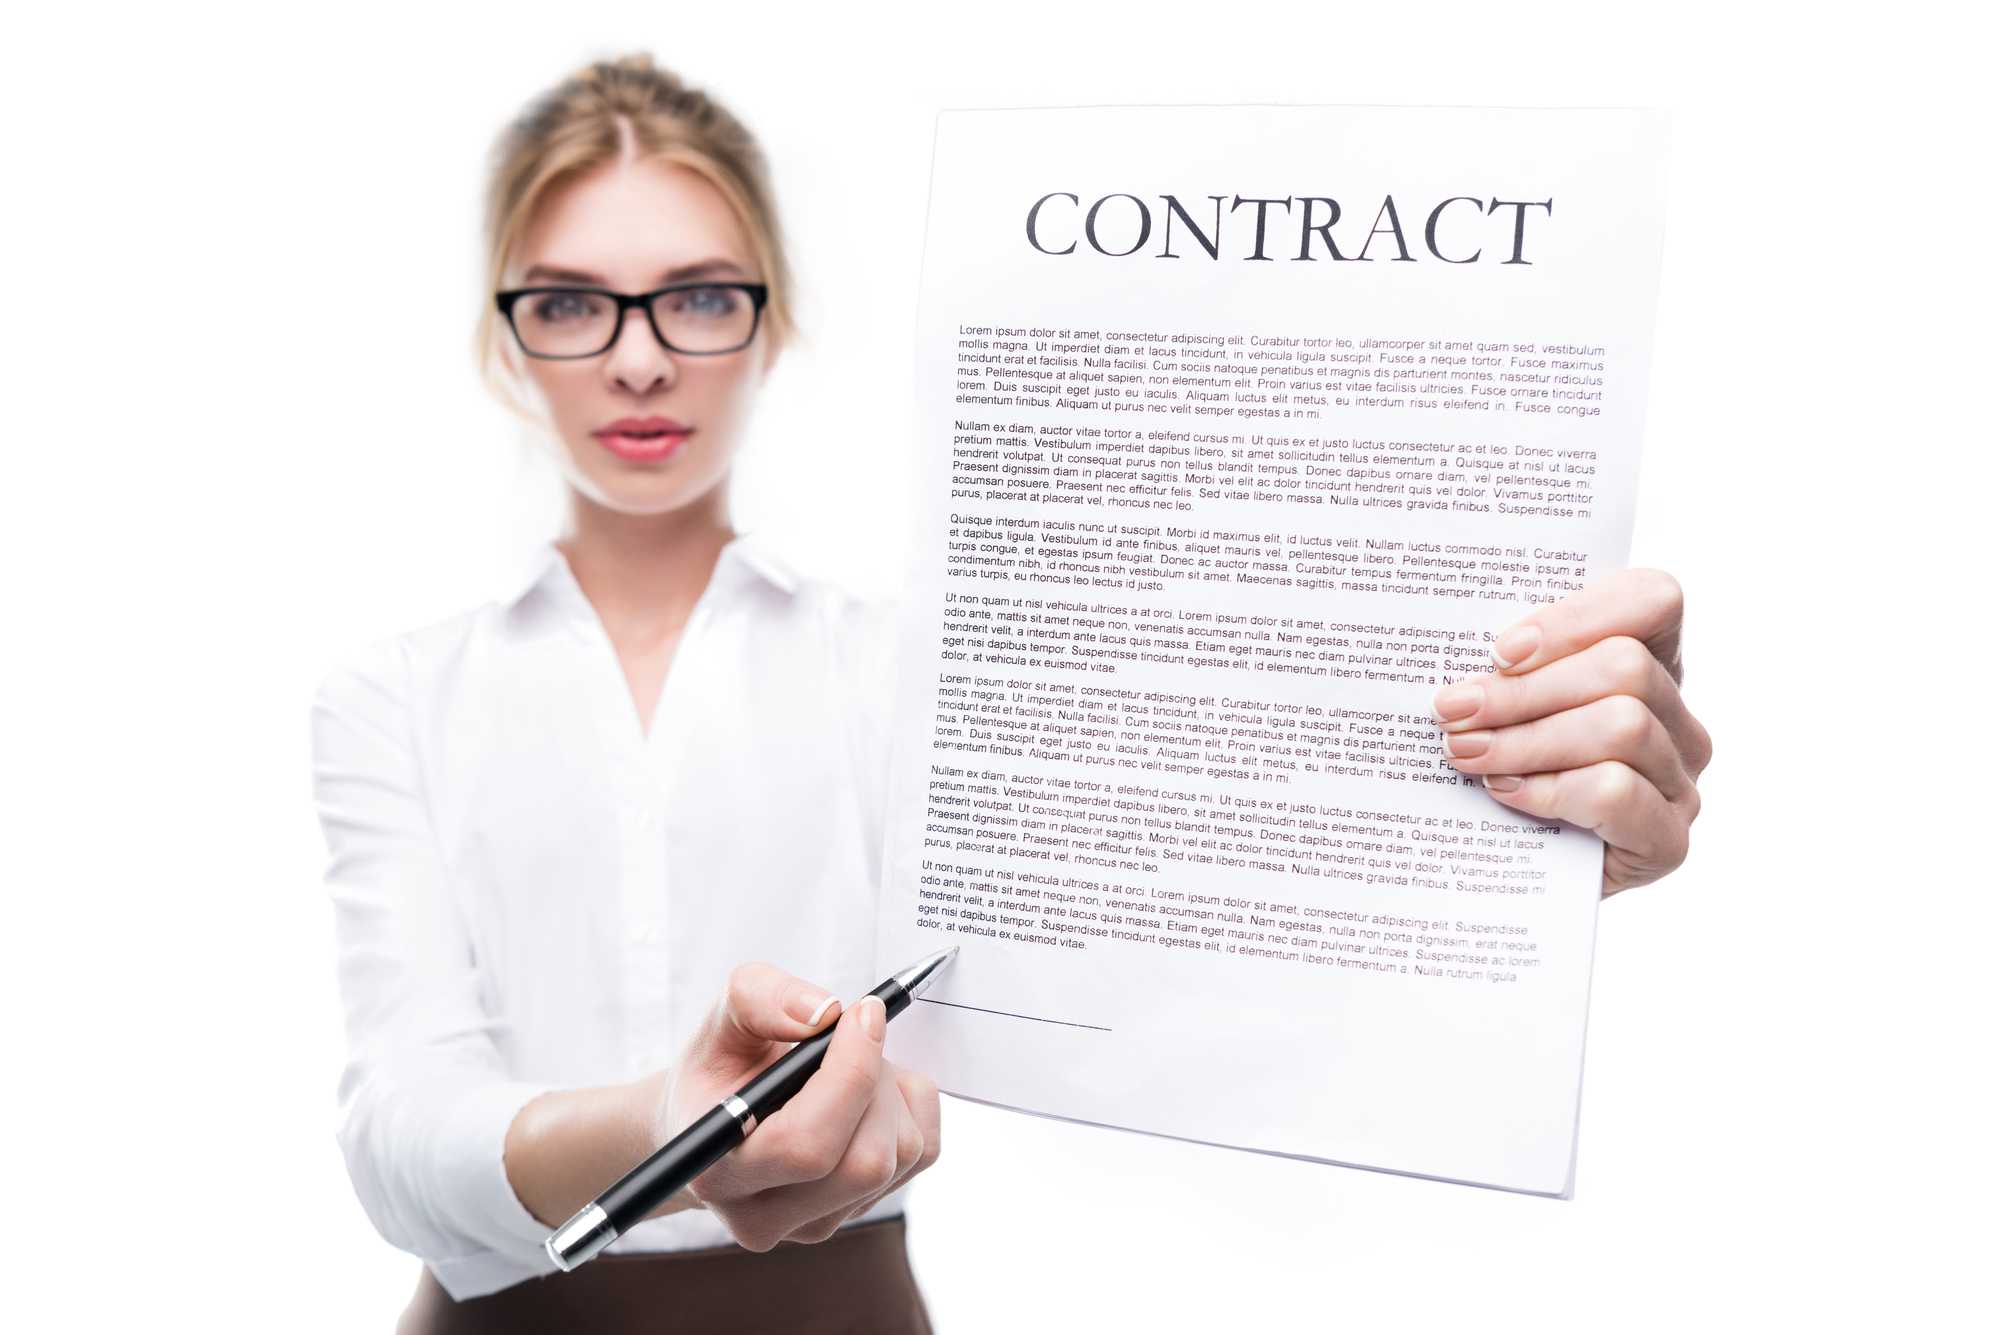 arbitration mediation adr contract clauses